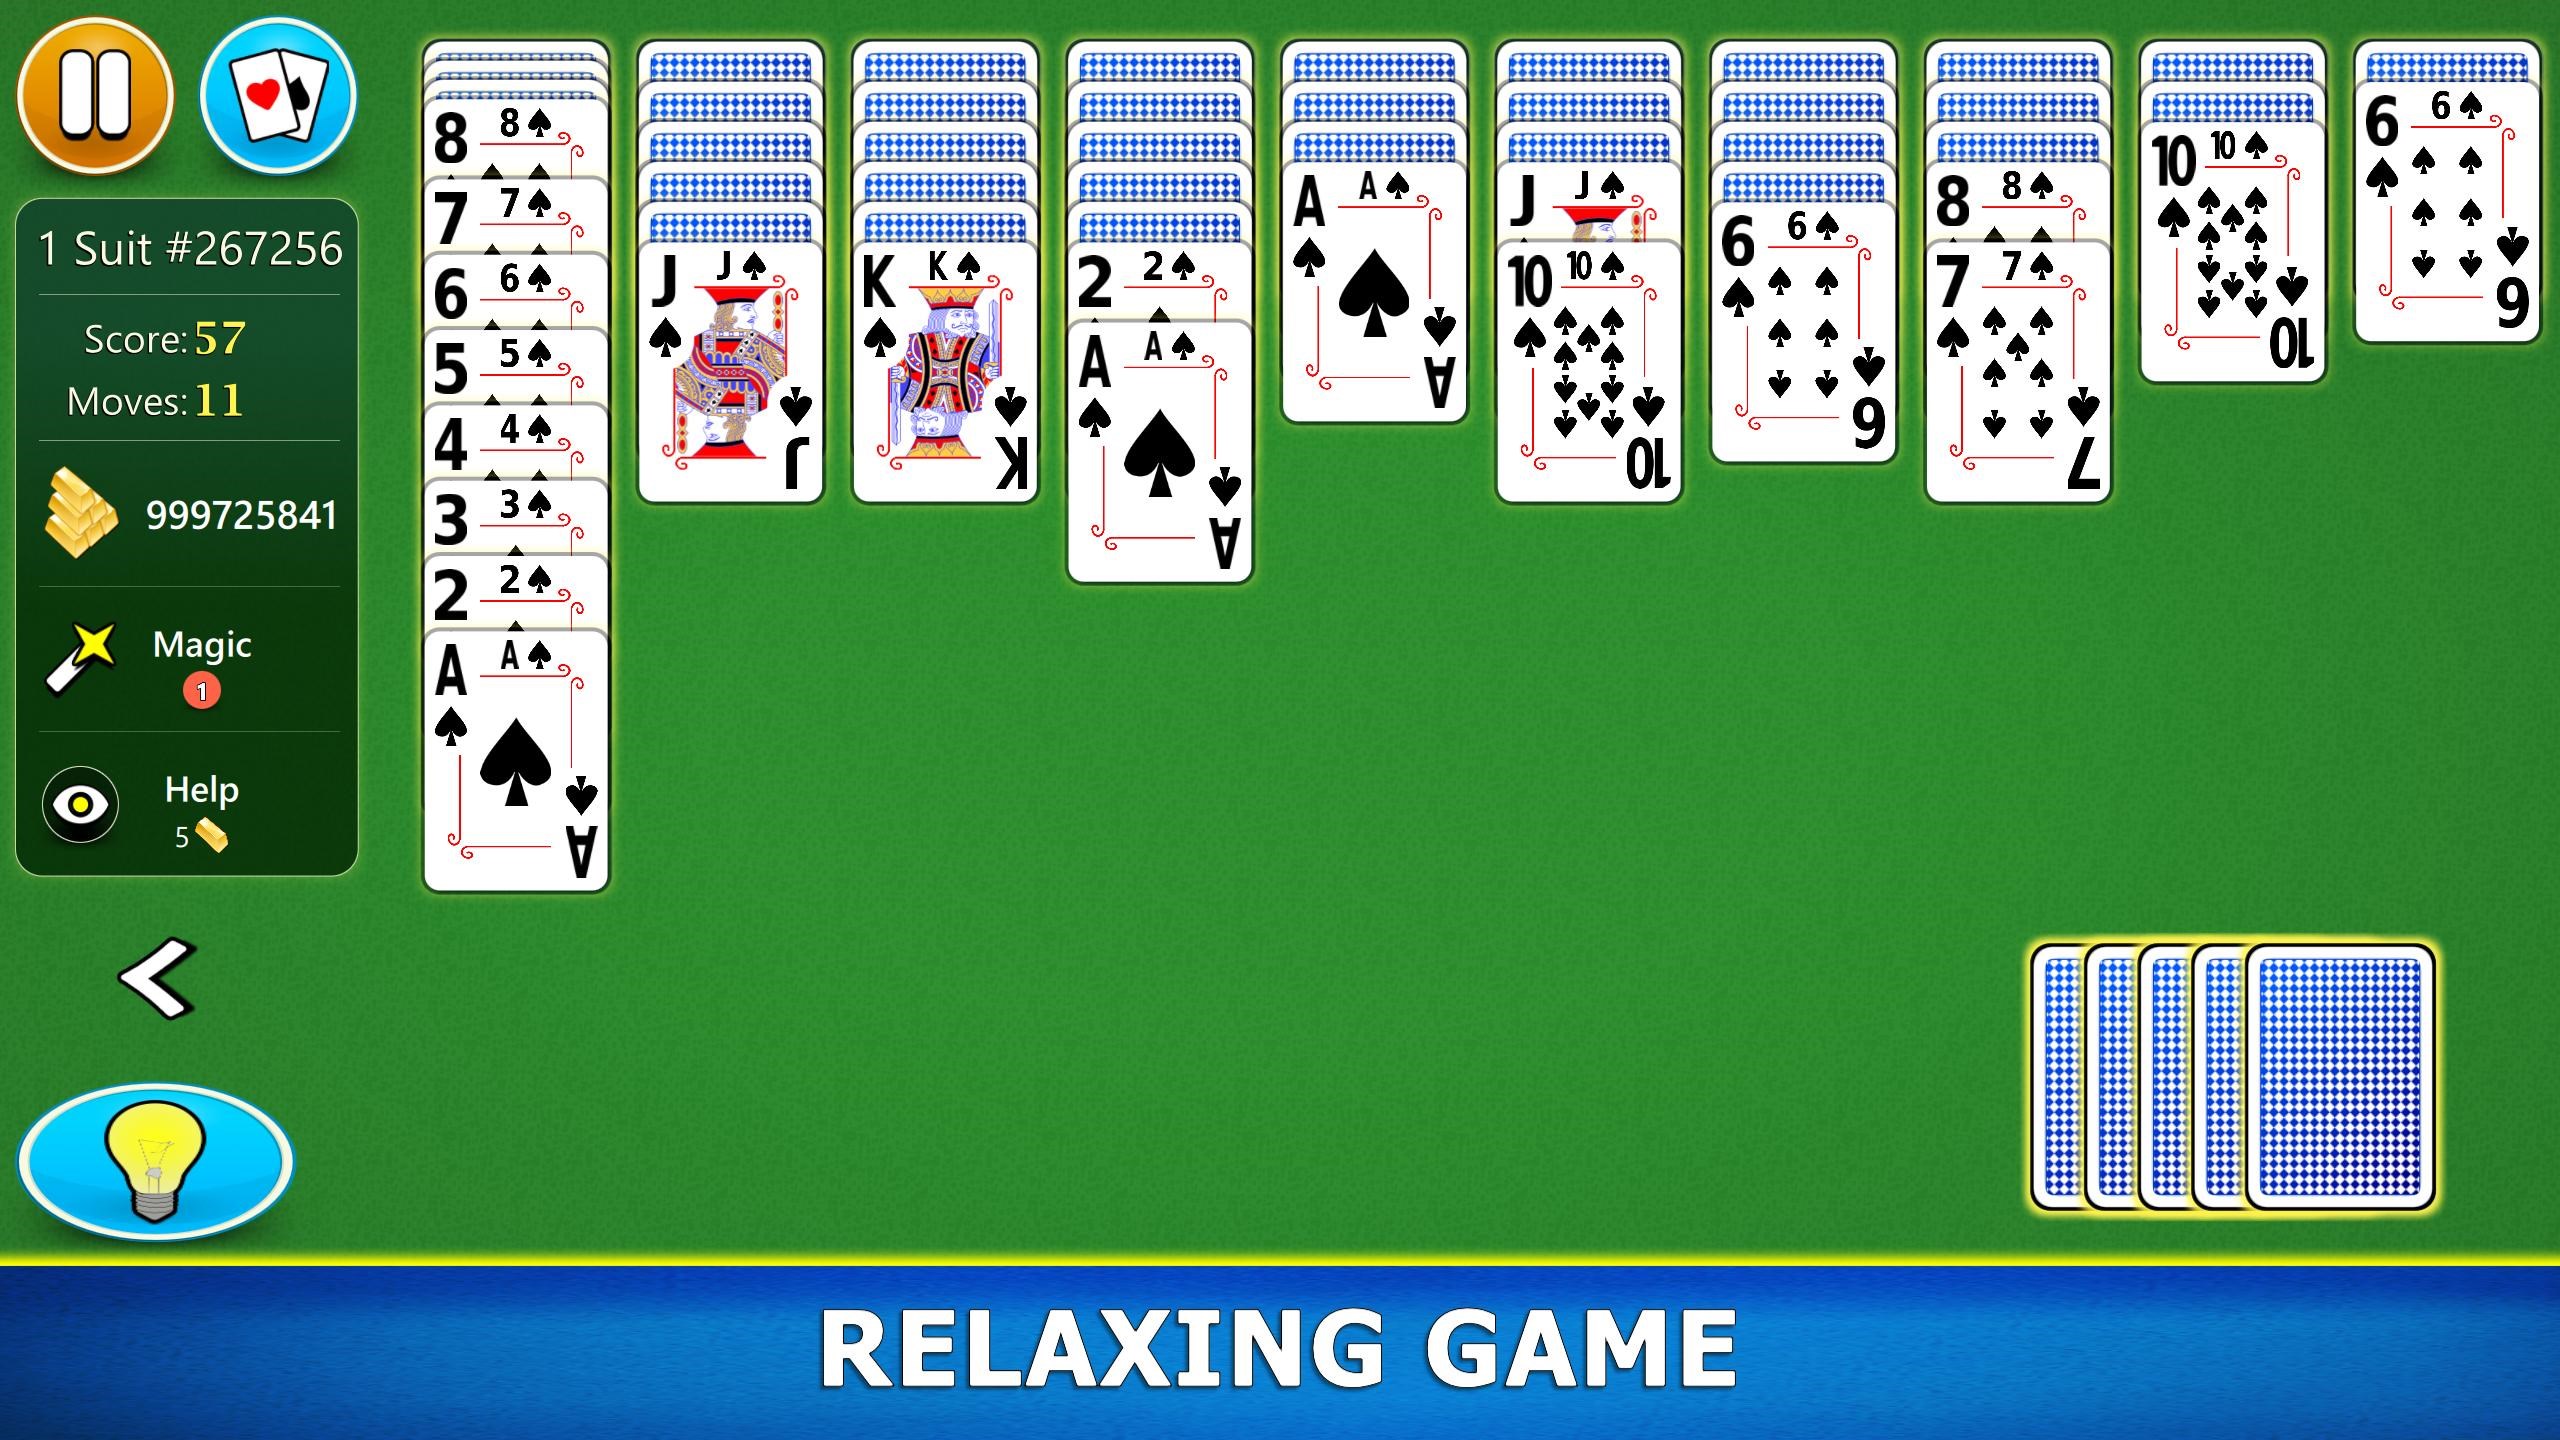 Spider solitaire 4 suits Winning 01 